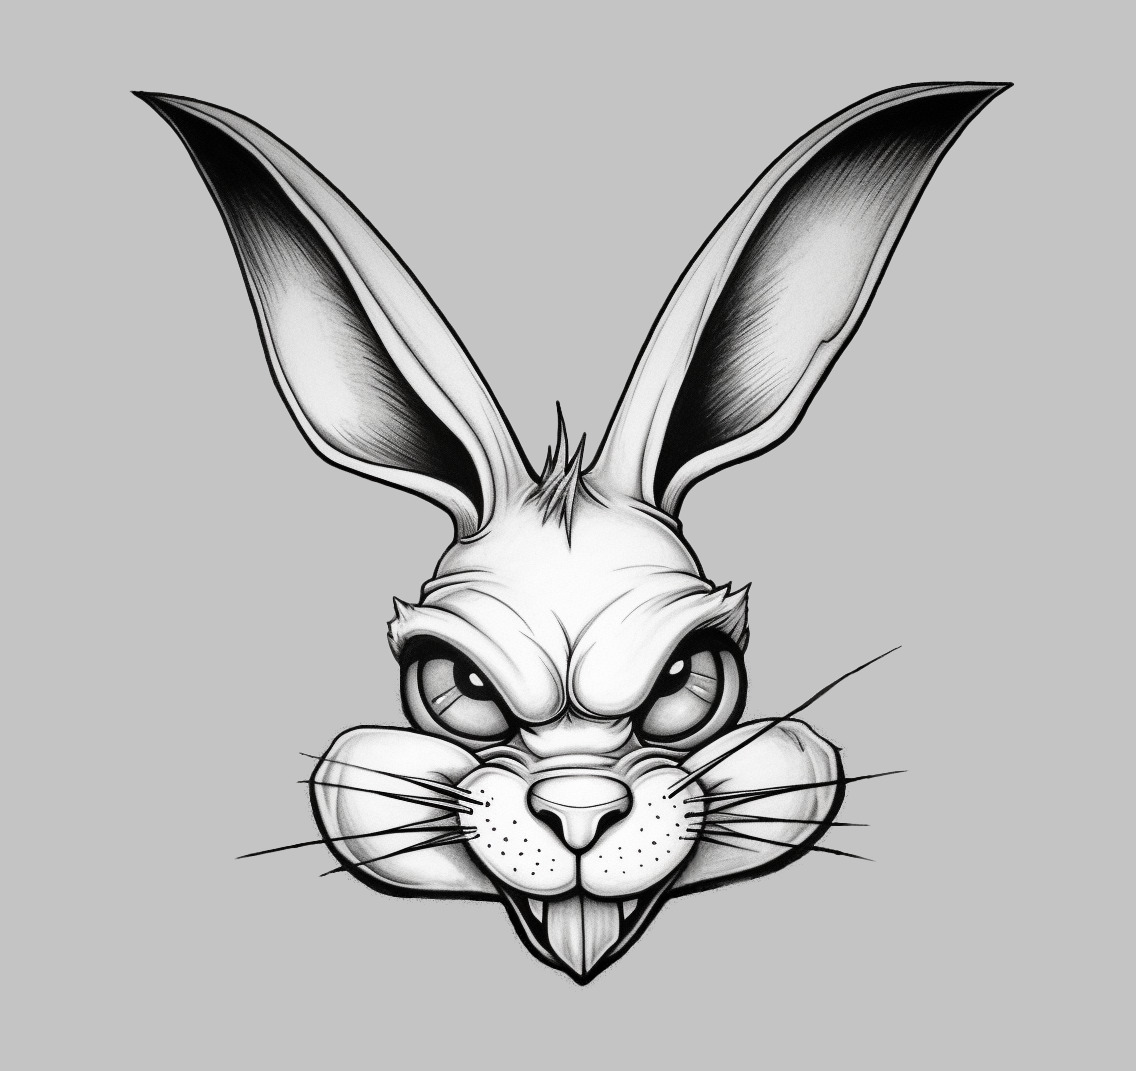 Black-and-white tattoo design of an evil Bugs Bunny cartoon character